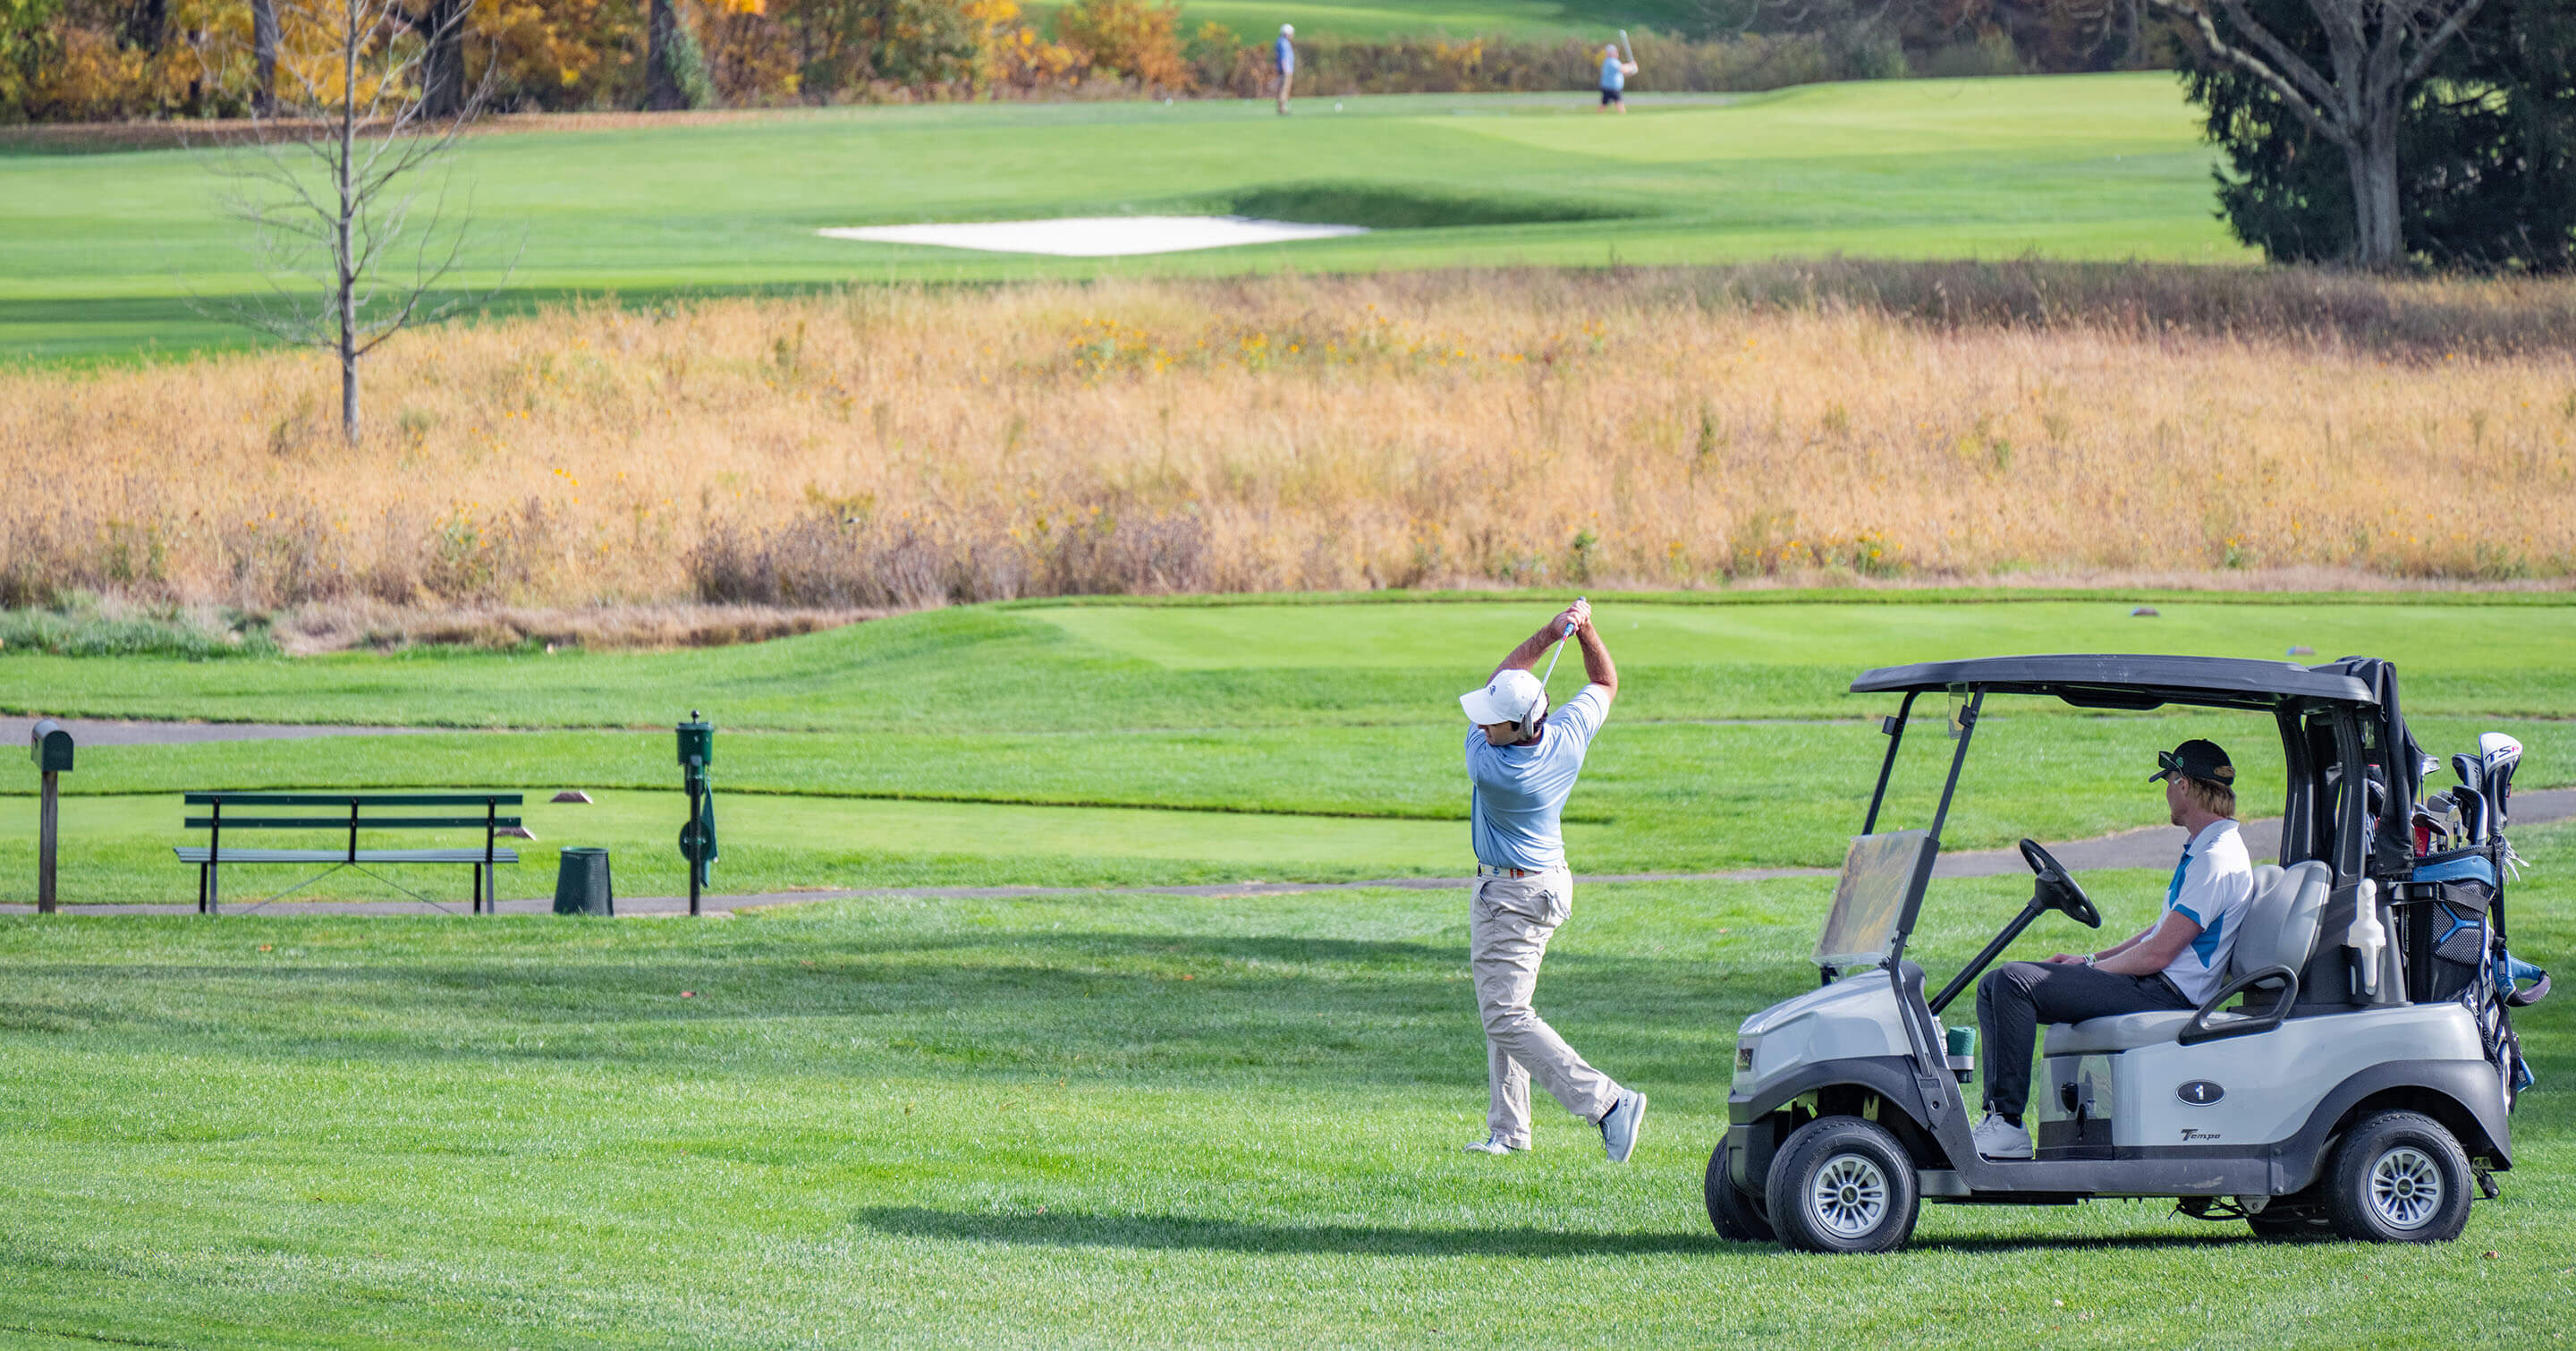 golfer swinging club in front of golf cart